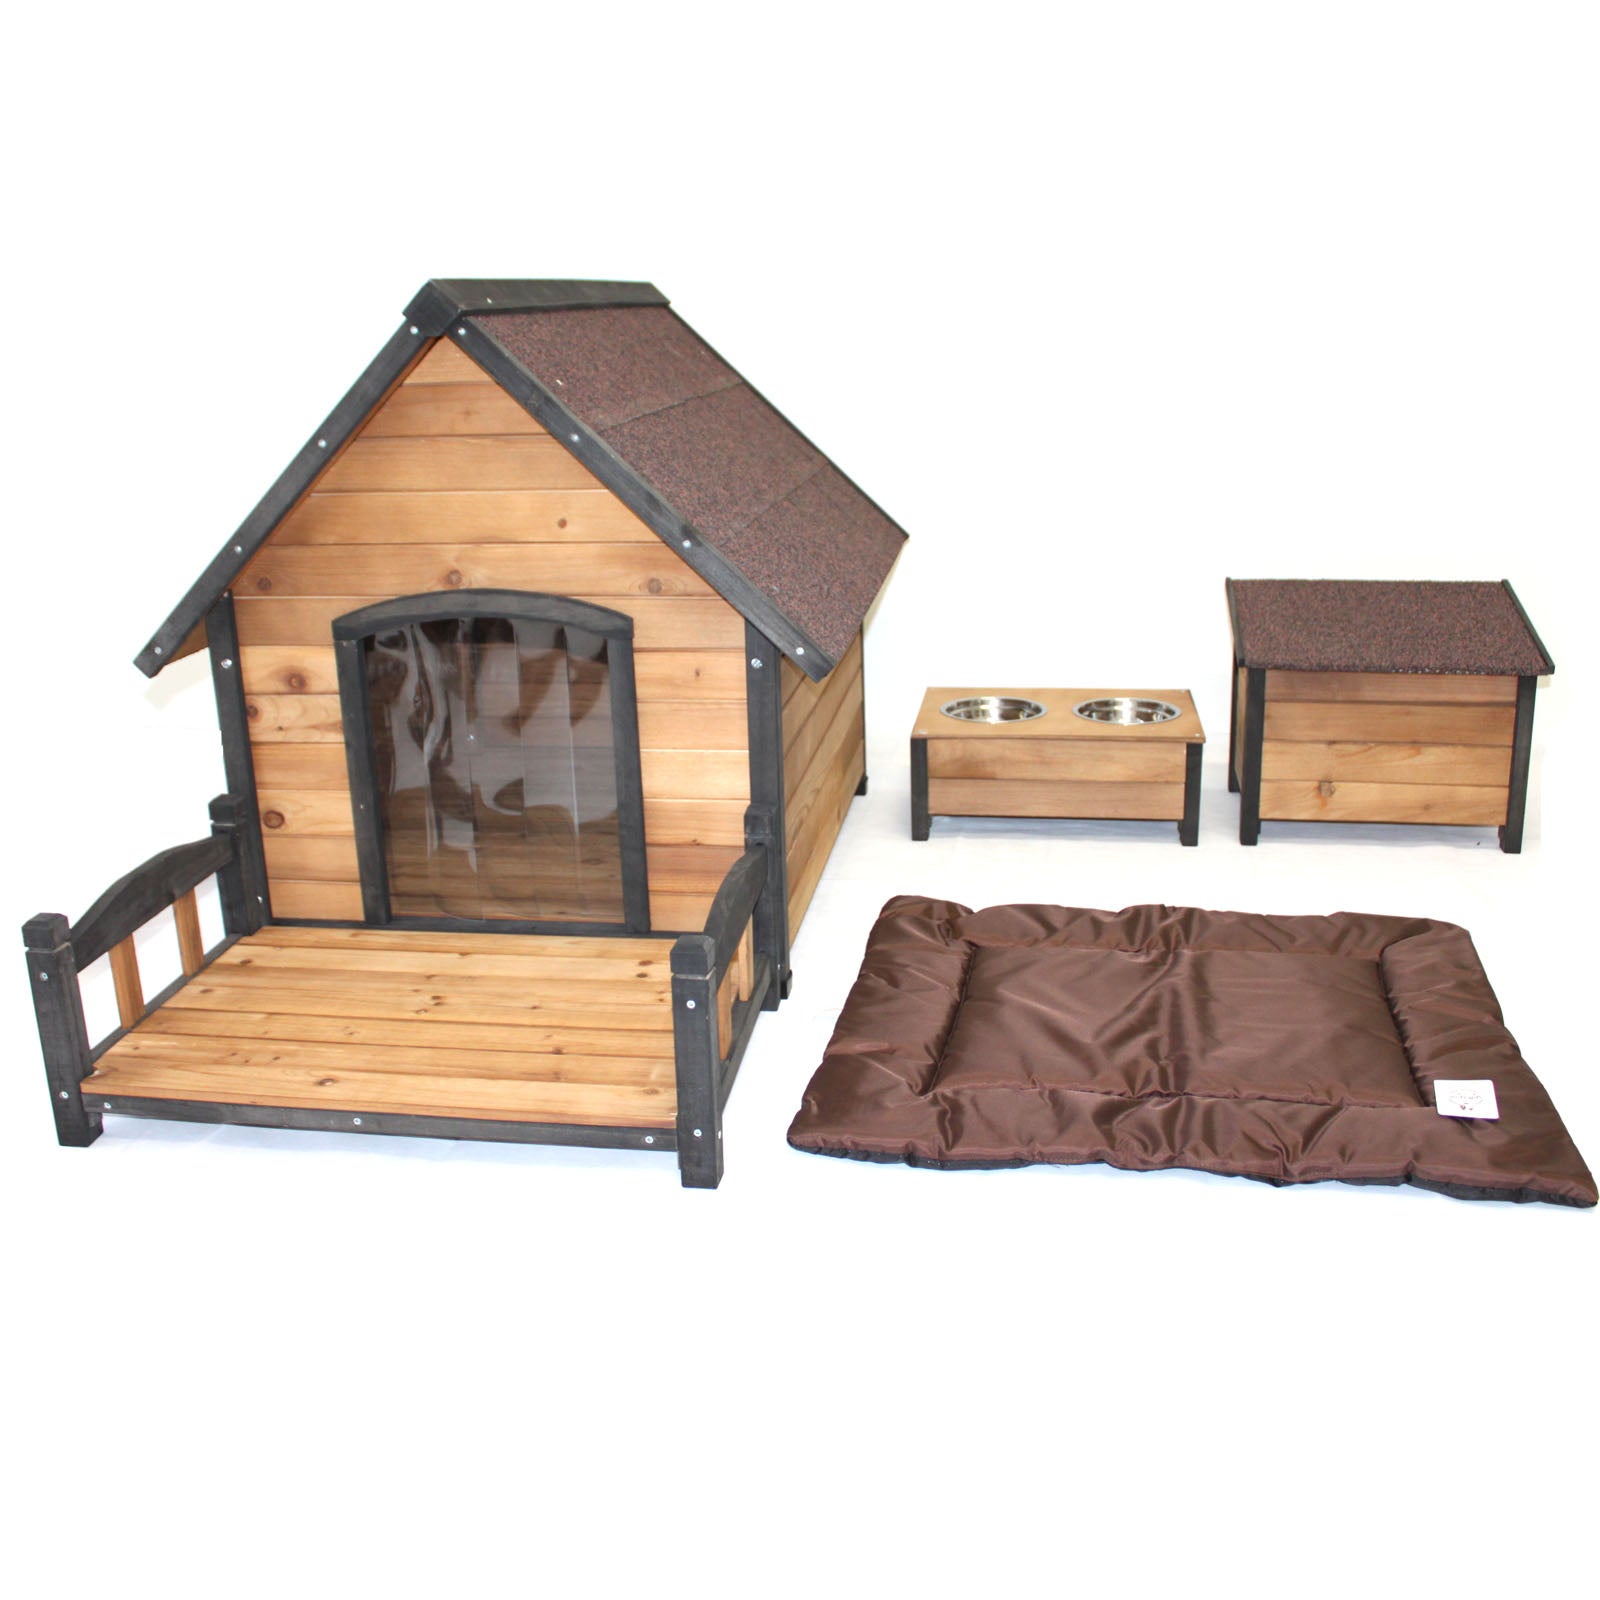 Dog Kennel House Large Timber Wood Pet Puppy Home Optional